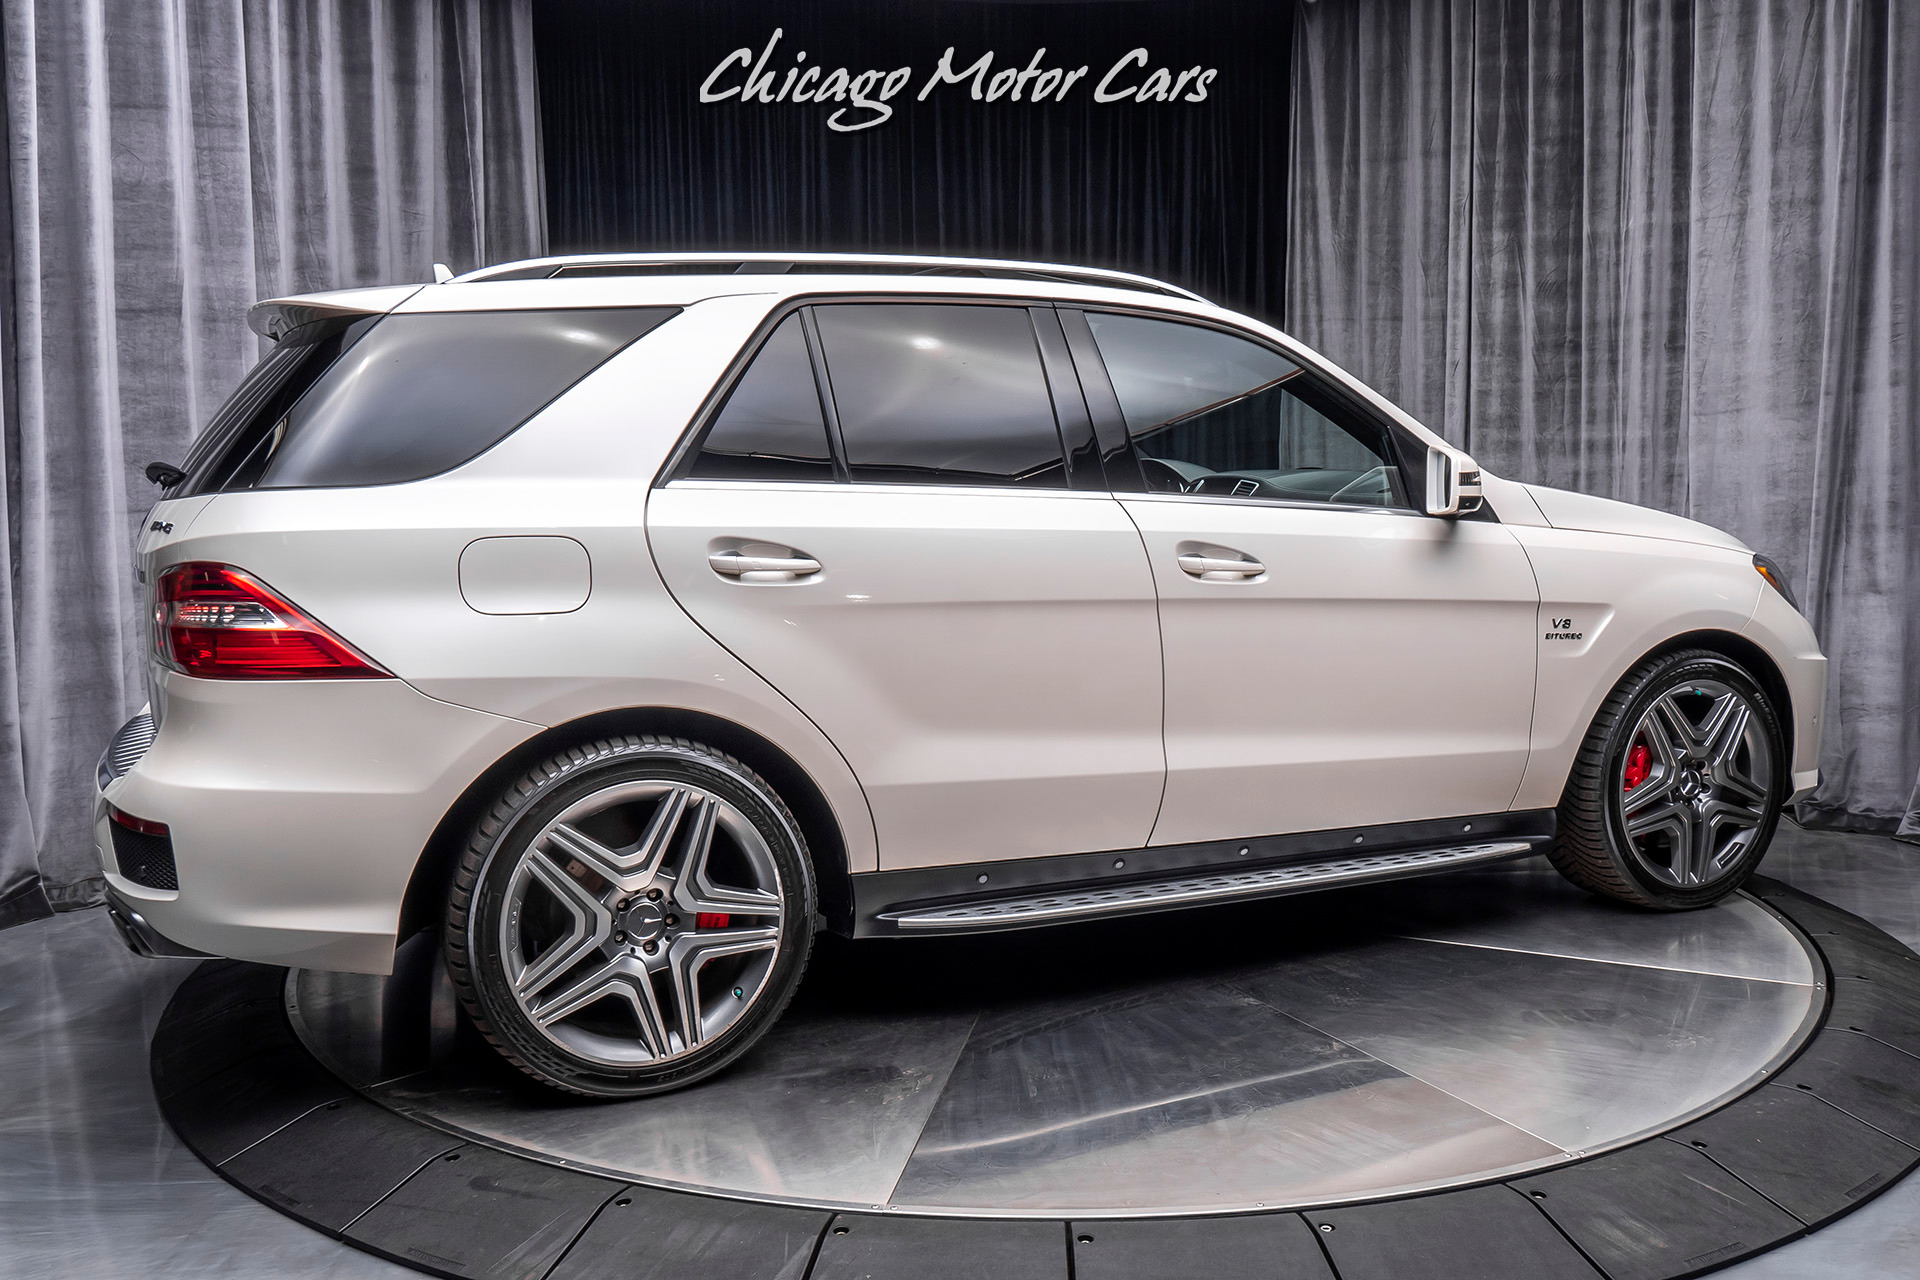 Used-2014-Mercedes-Benz-ML63-AMG-SUV-MSRP-118K